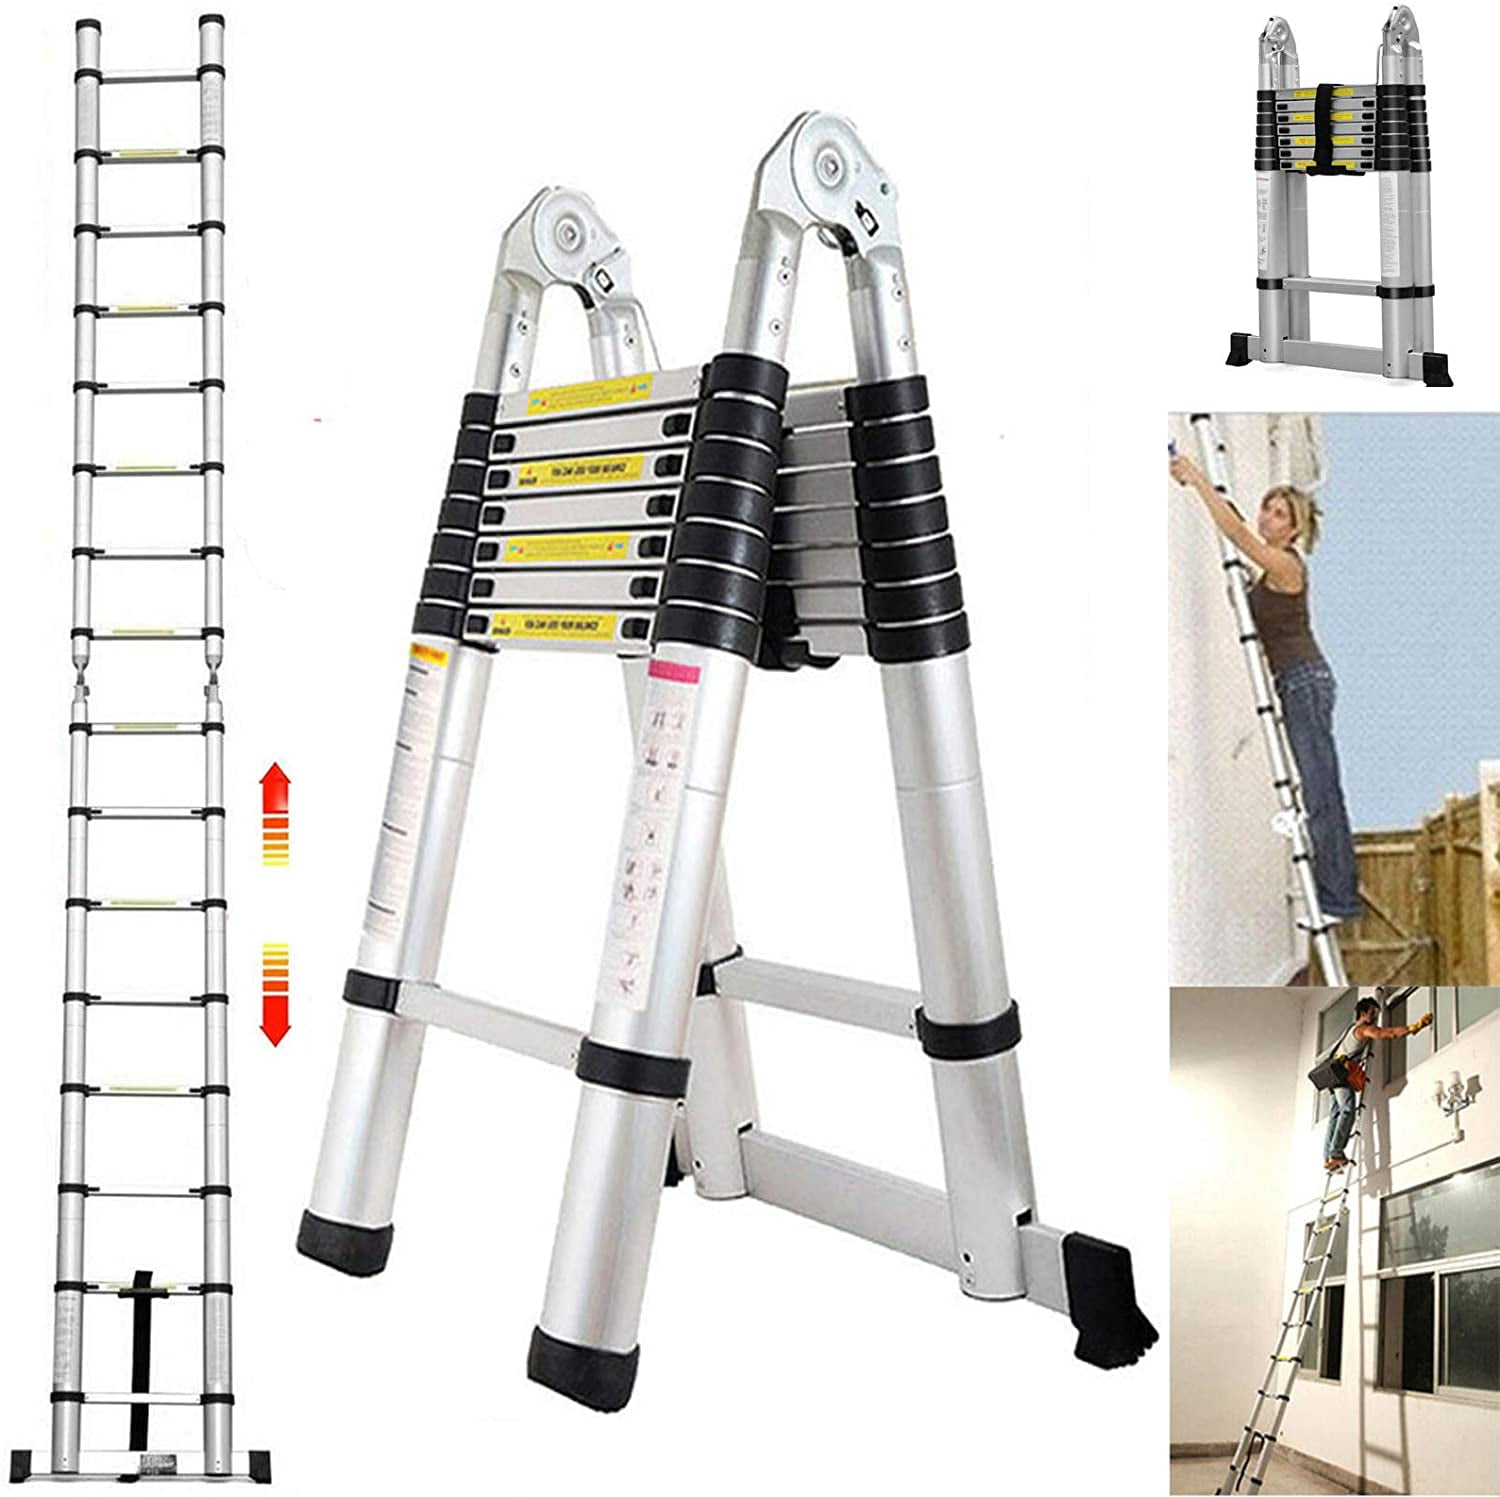 2.5m+2.5m Folding Telescopic Ladders EN131 Silver Aluminum Telescoping Ladder A-Frame Straight Ladder Loft Home Office Outdoors Max Capacity 330LB Portable Extendable Ladder w/ Stabilizer